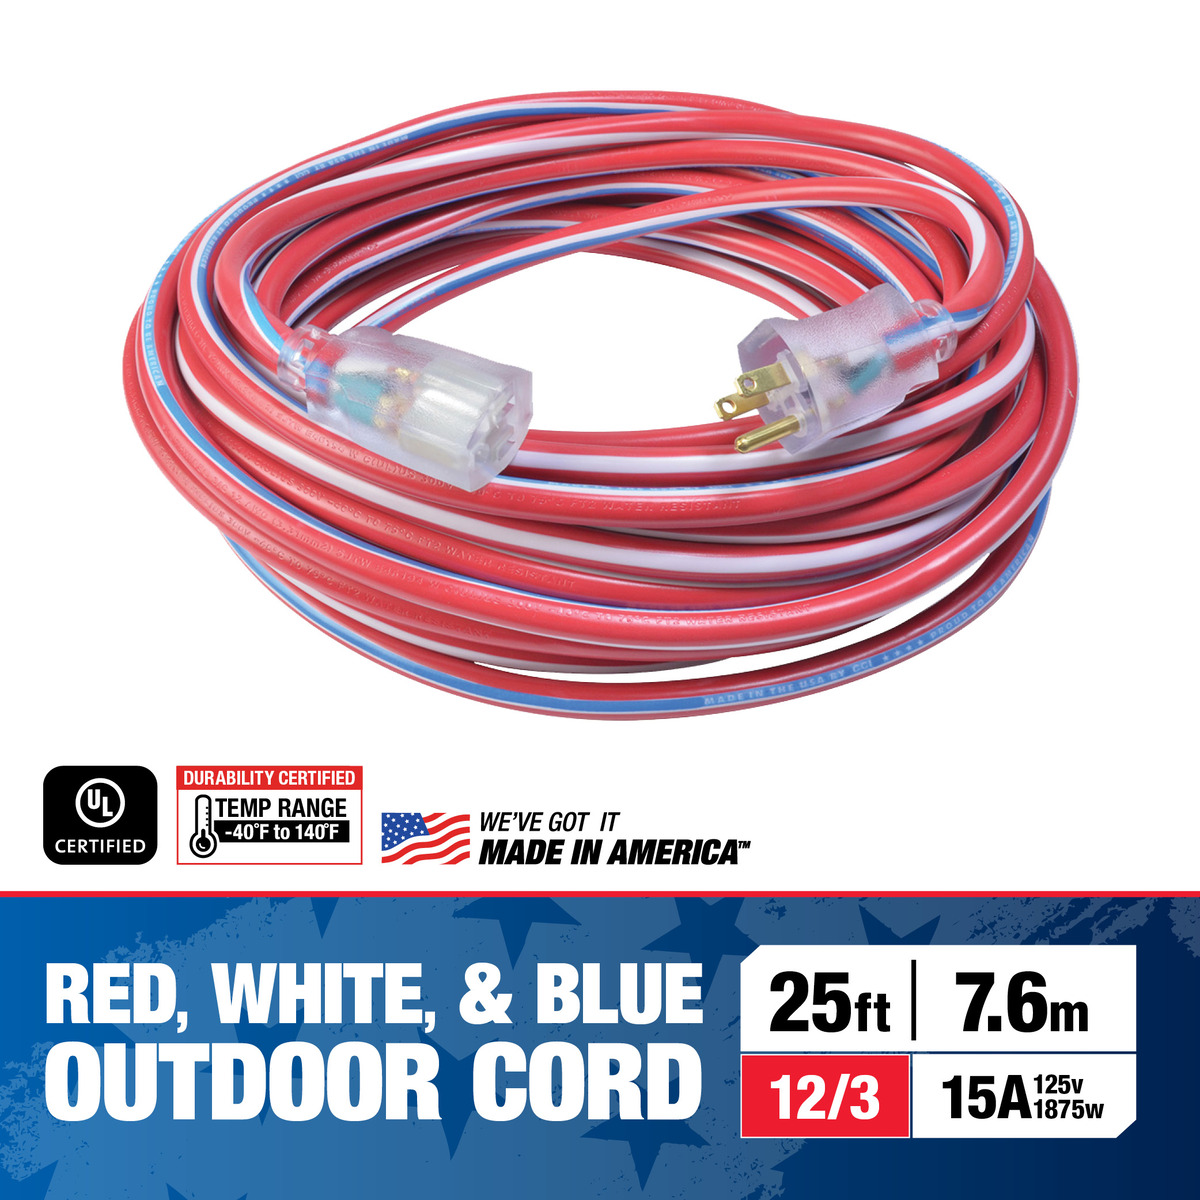 100-Feet Contractor Grade 12/3 Lighted End American Made Cord - Wounded Warrior Project® 